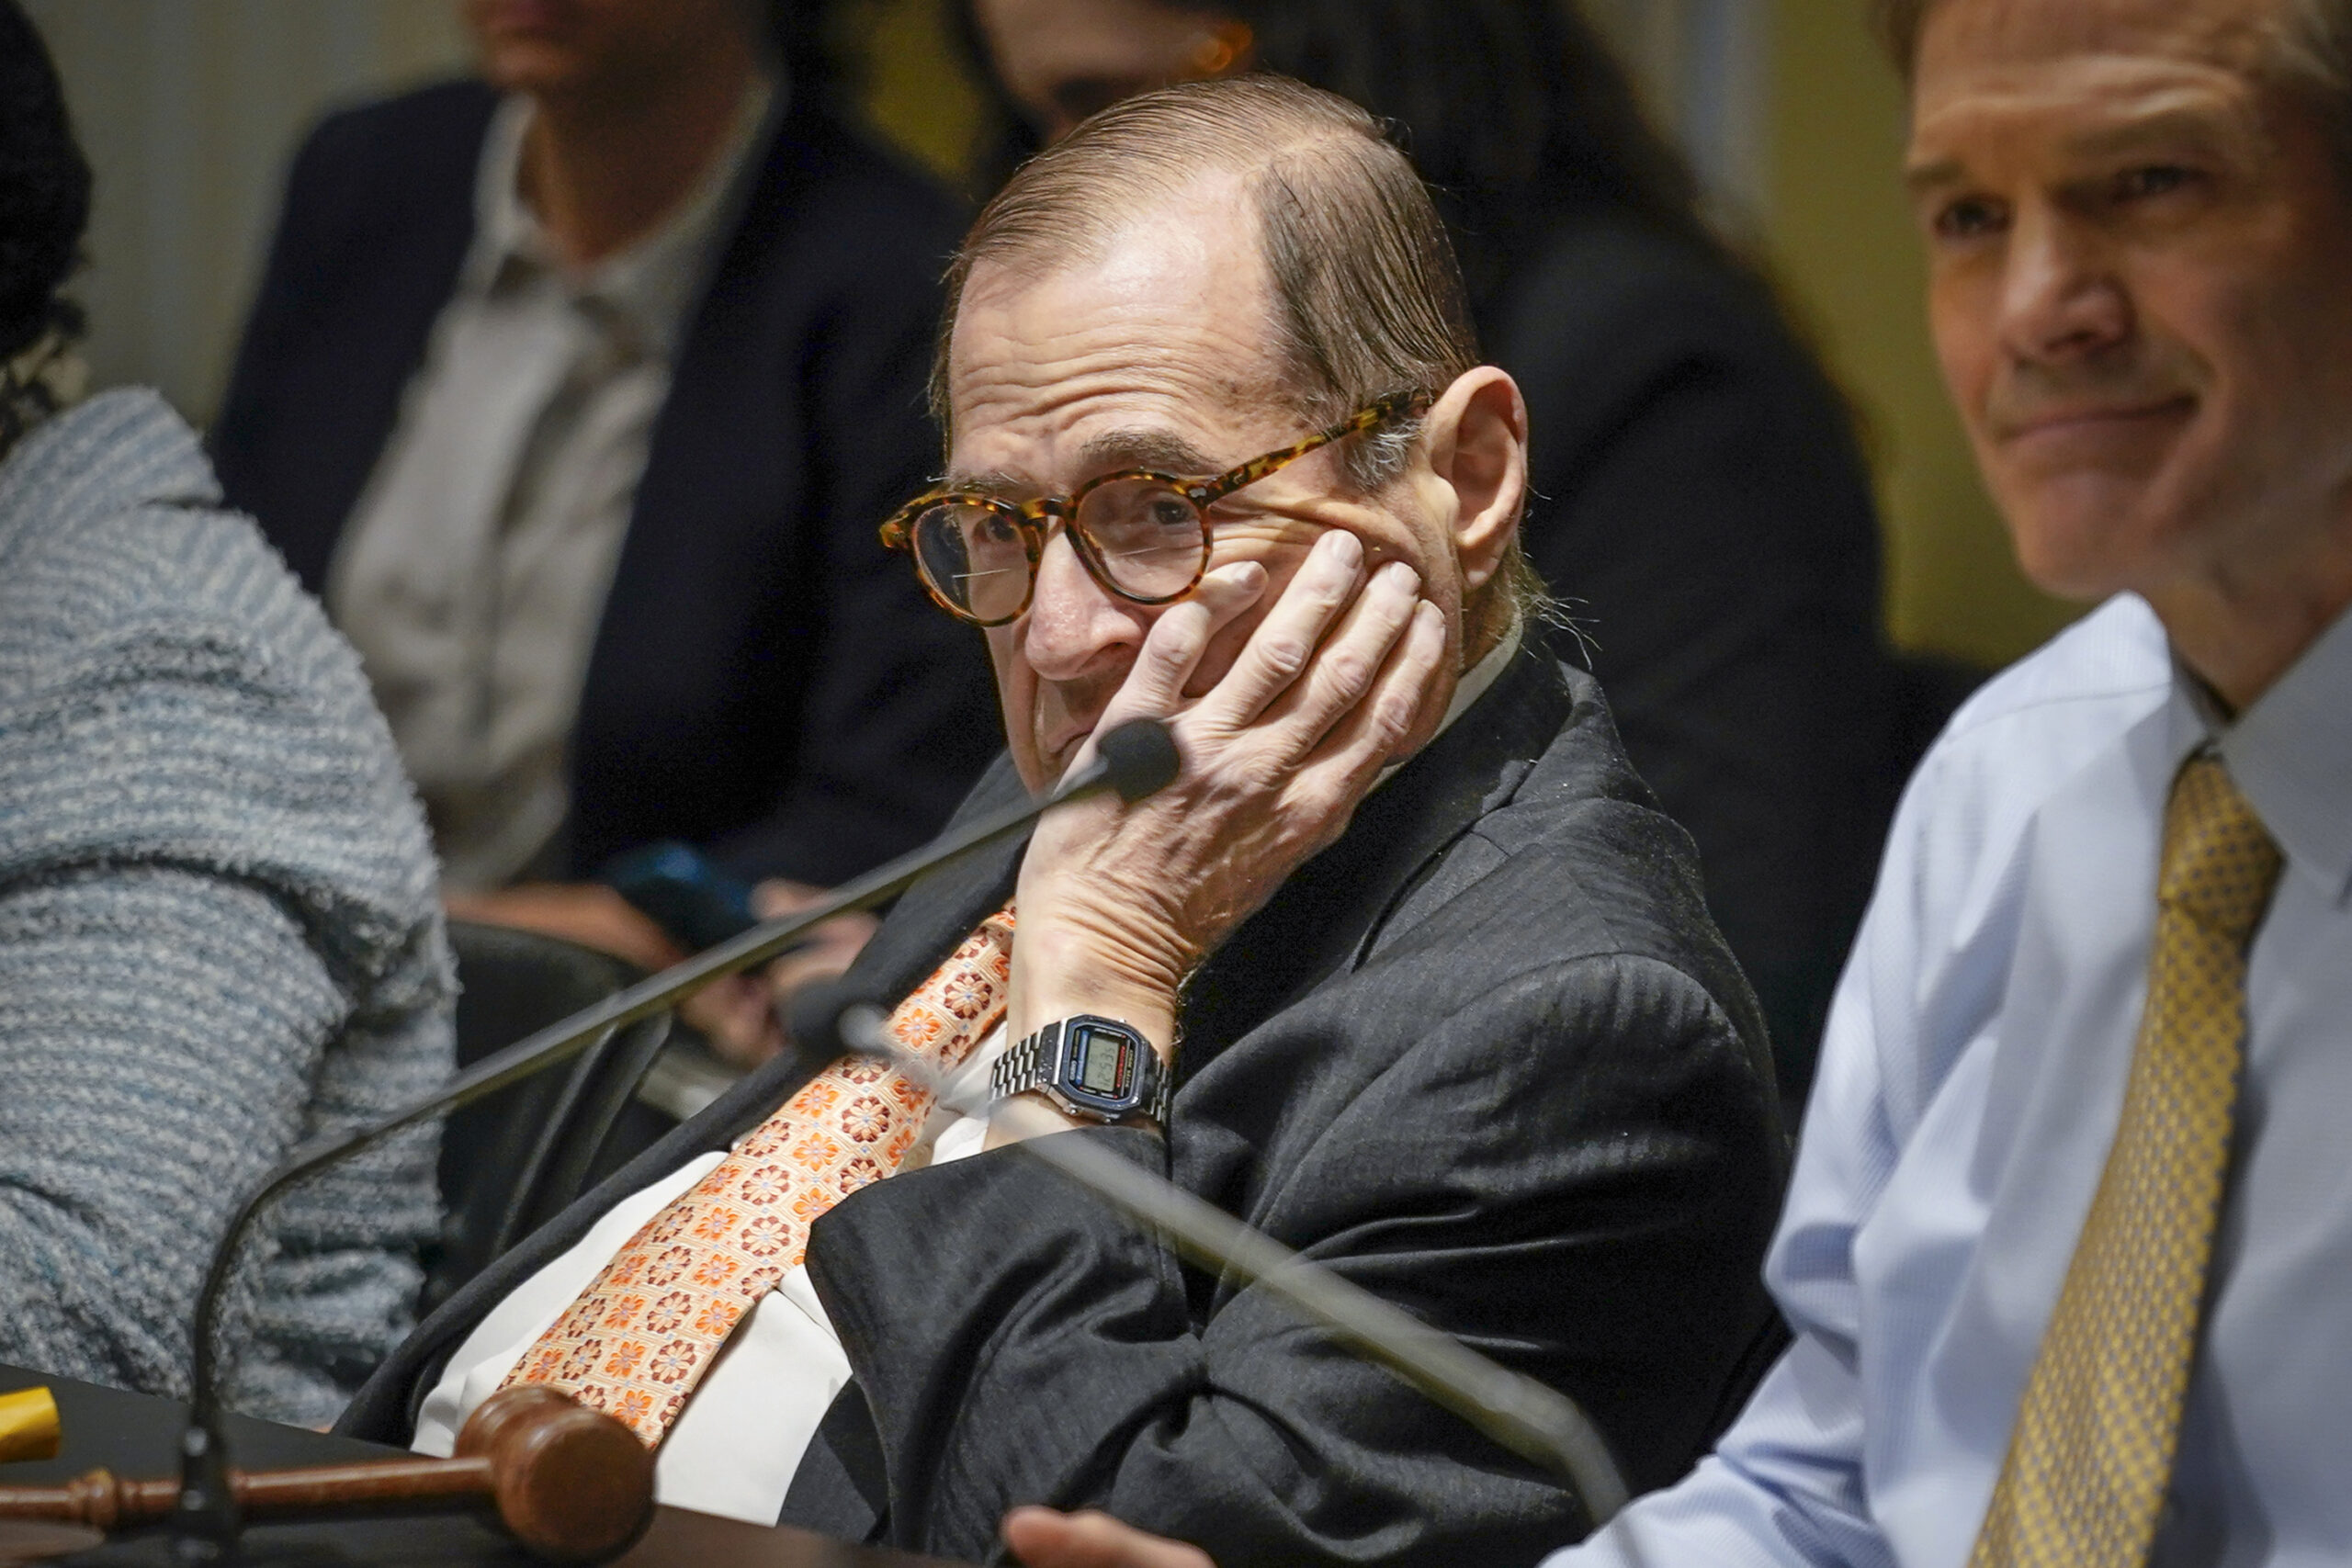 Rep. Jerry Nadler, D-N.Y., listens to proceedings alongside House Judiciary Committee Chair Jim Jordan, R-Ohio, right, during a House Judiciary Committee Field Hearing, Monday, April 17, 2023, in New York. Republicans upset with former President Donald Trump's indictment are escalating their war on Manhattan District Attorney Alvin Bragg who charged him, trying to embarrass him on his home turf. 